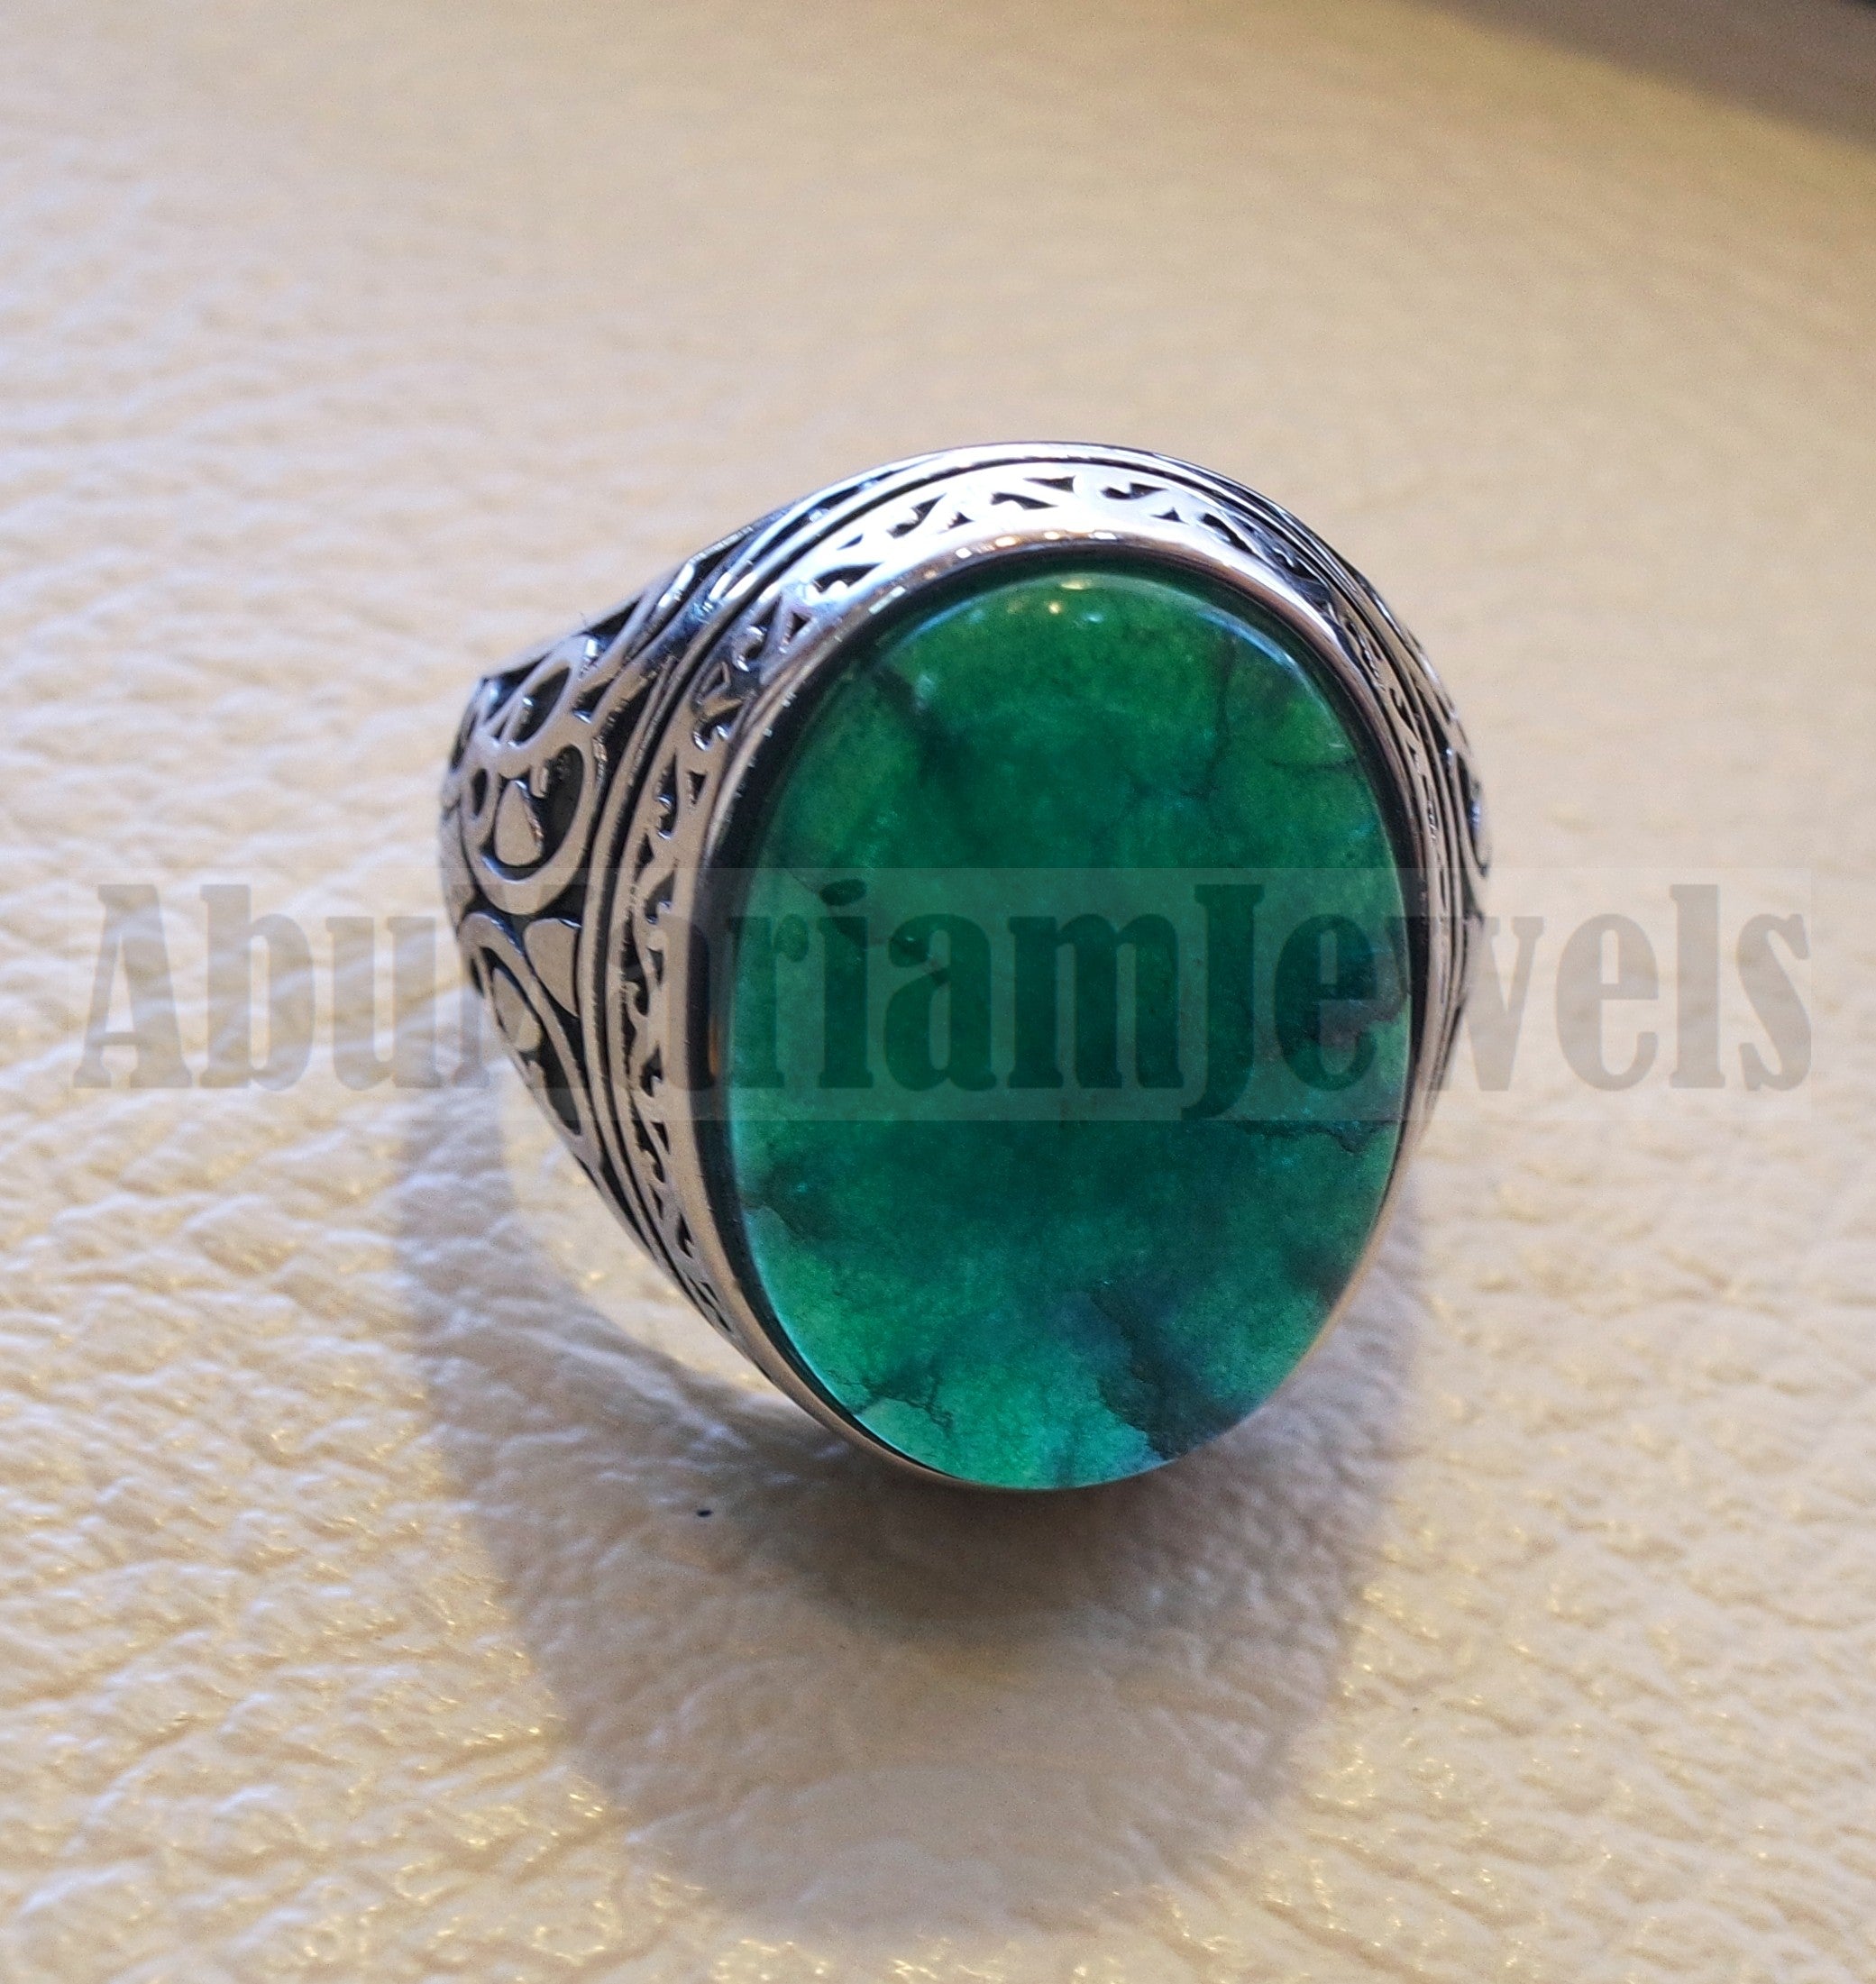 Treated natural corundum identical to genuine emerald stone color huge men ring sterling silver 925 any size ottoman jewelry زمرد